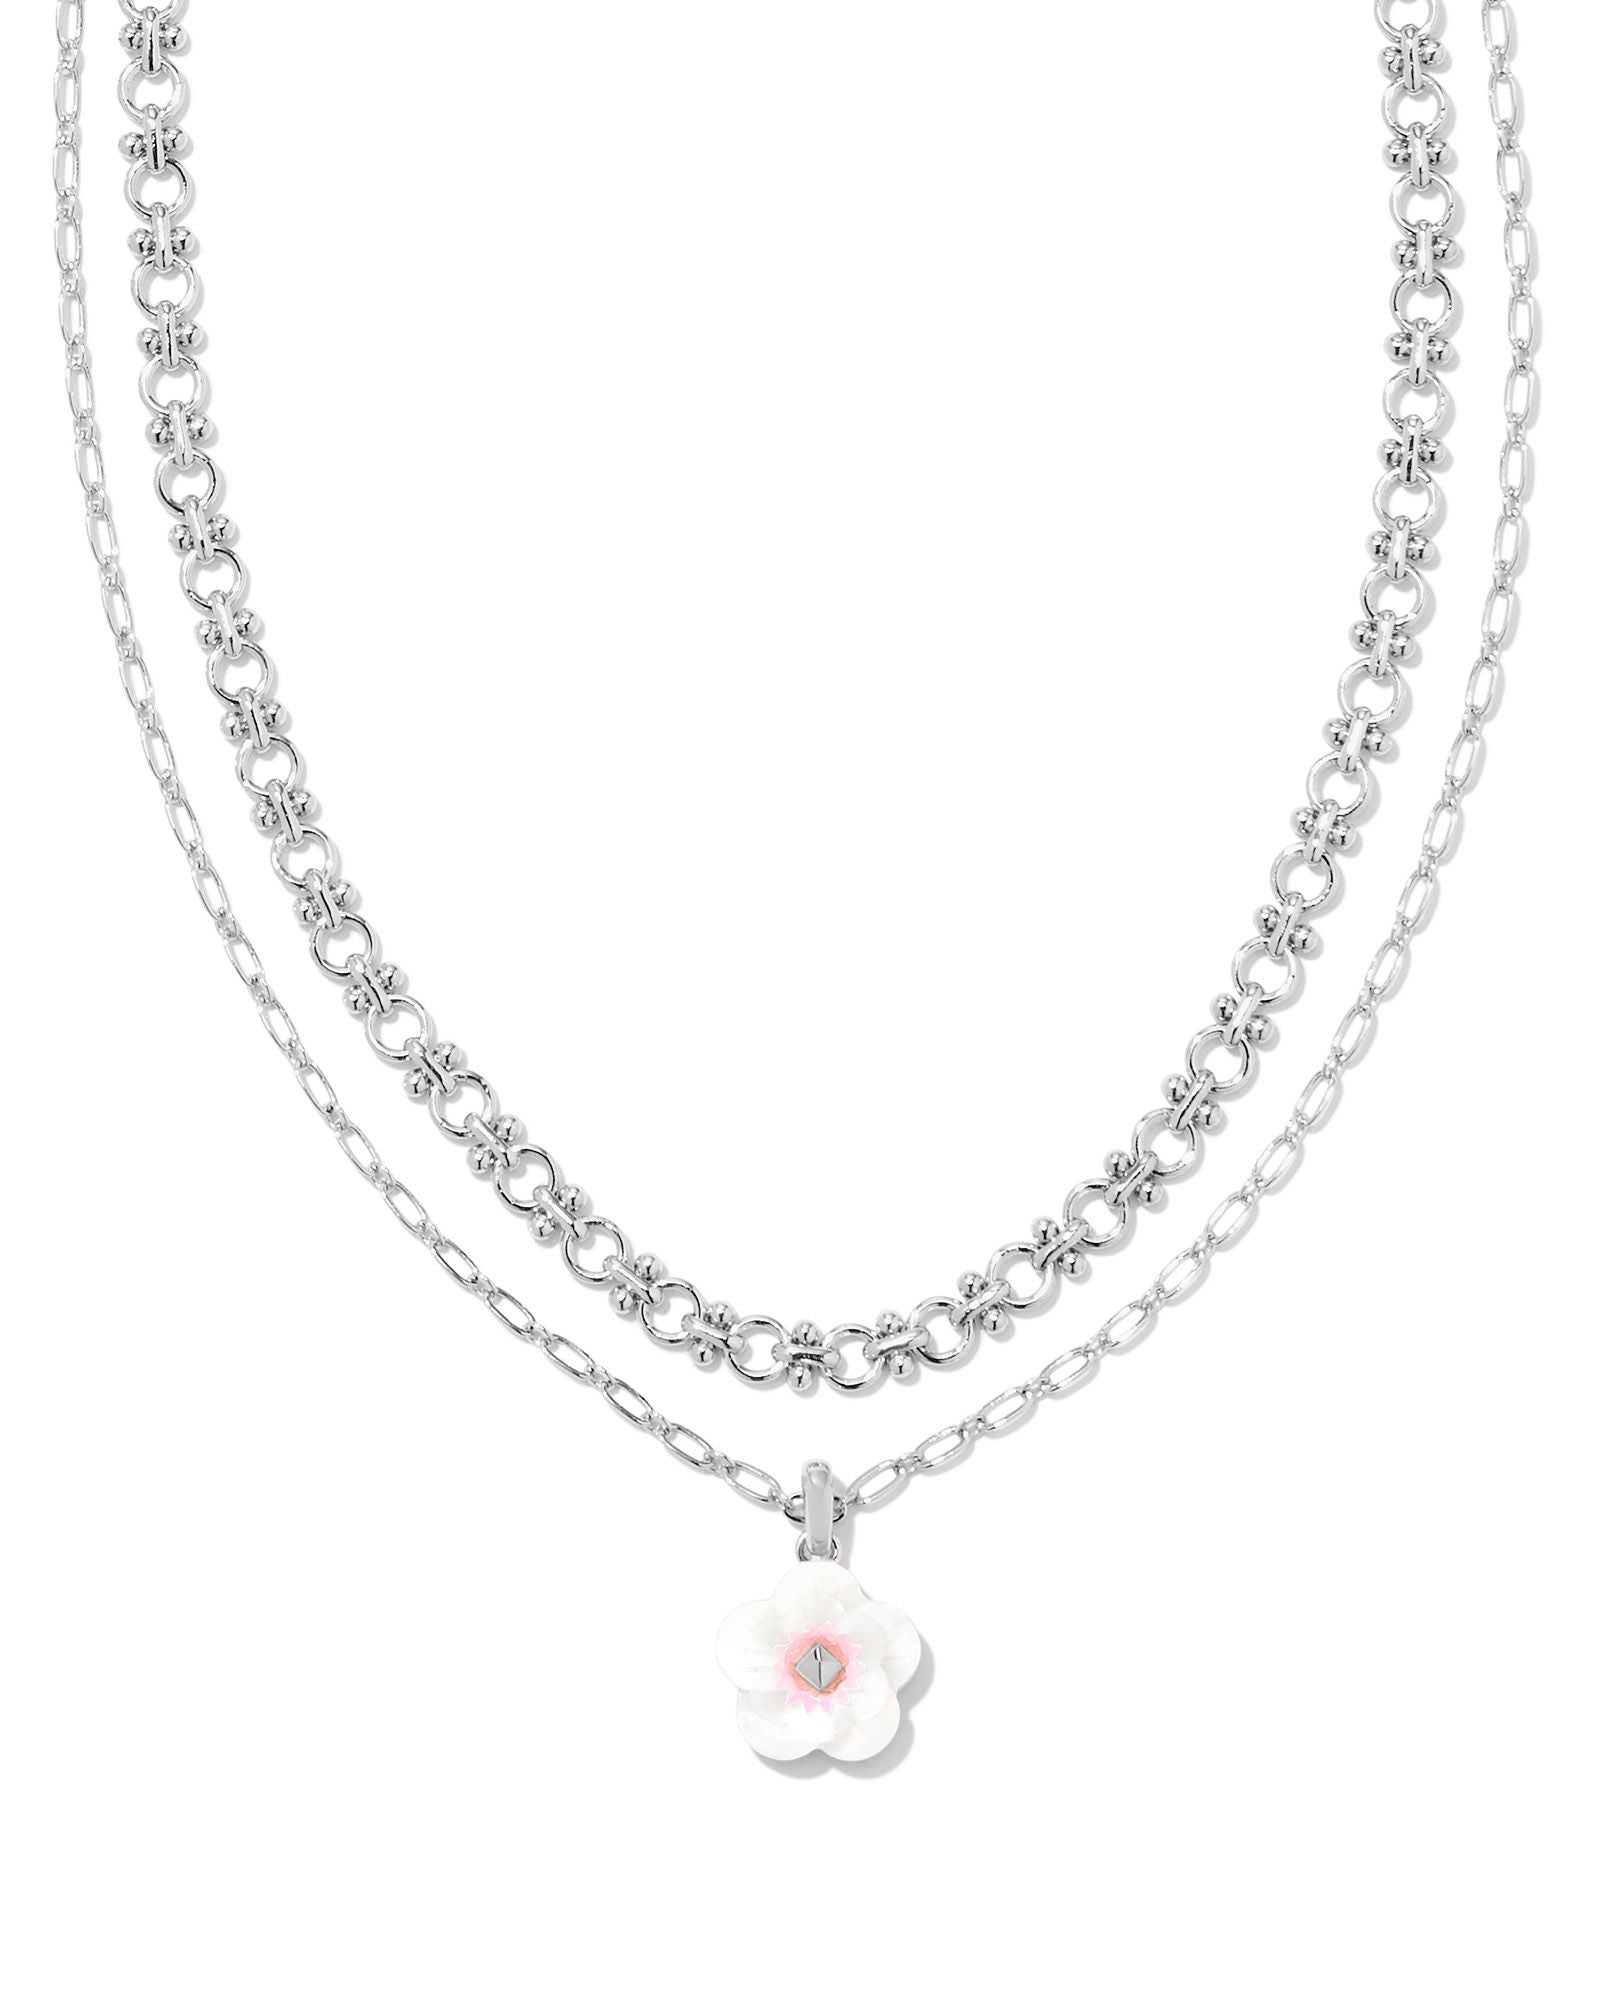 Deliah Silver Multi Strand Necklace Iridescent Pink White Mix